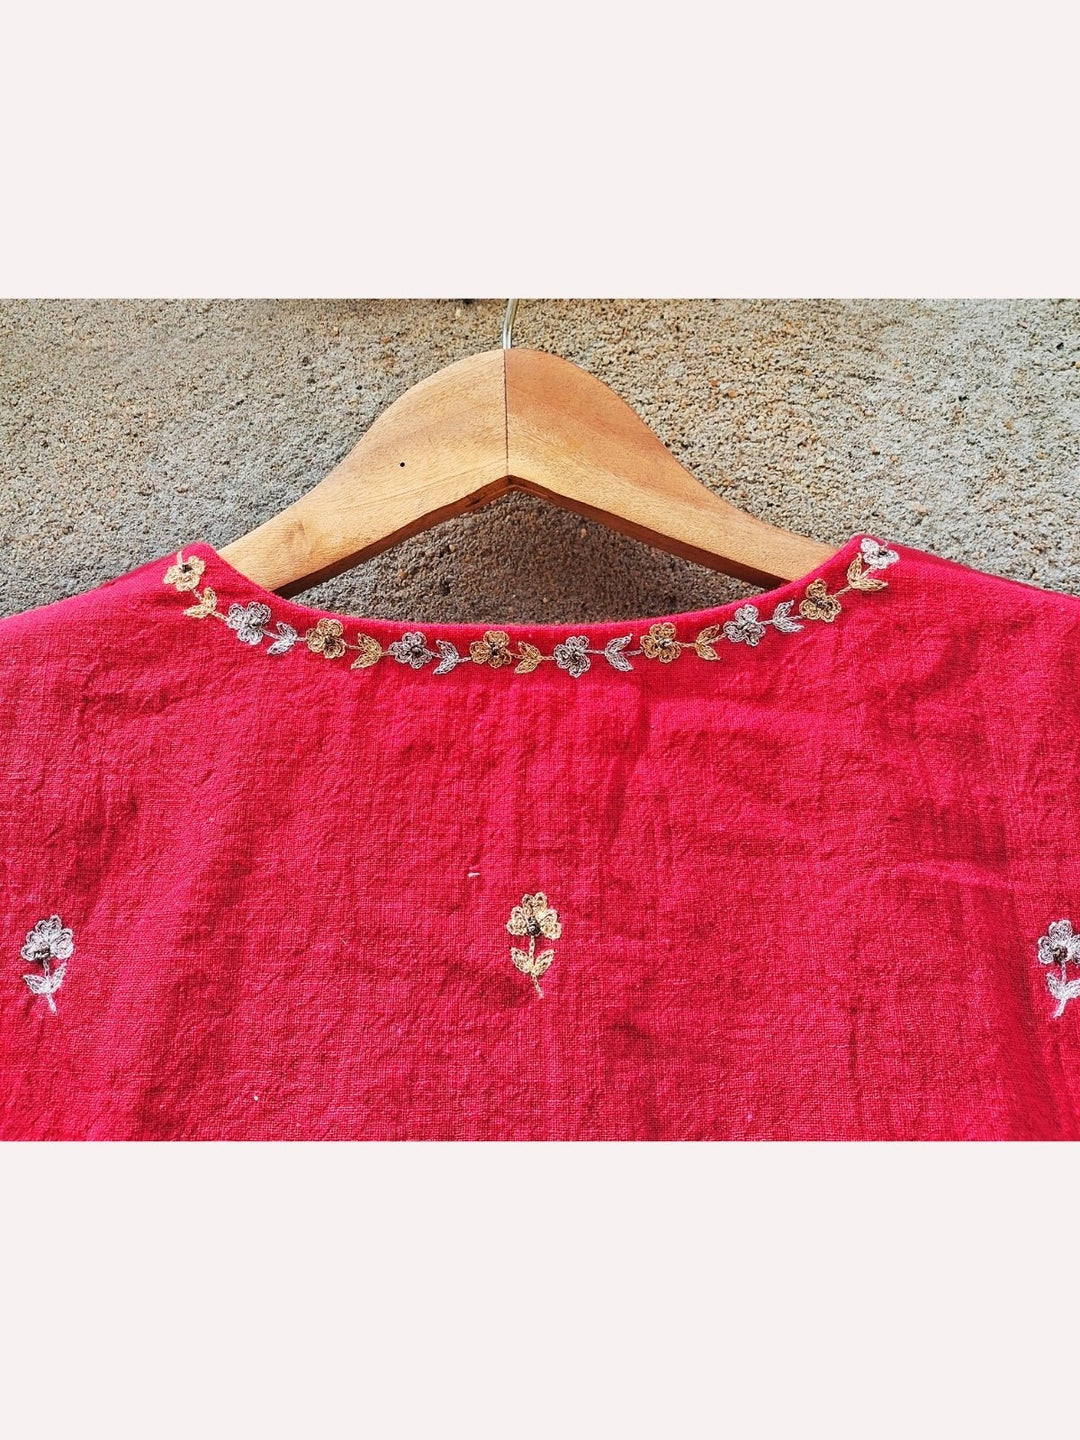 BlousesRoma Hand Embroidered Blouse in Handwoven CottonEarth Route